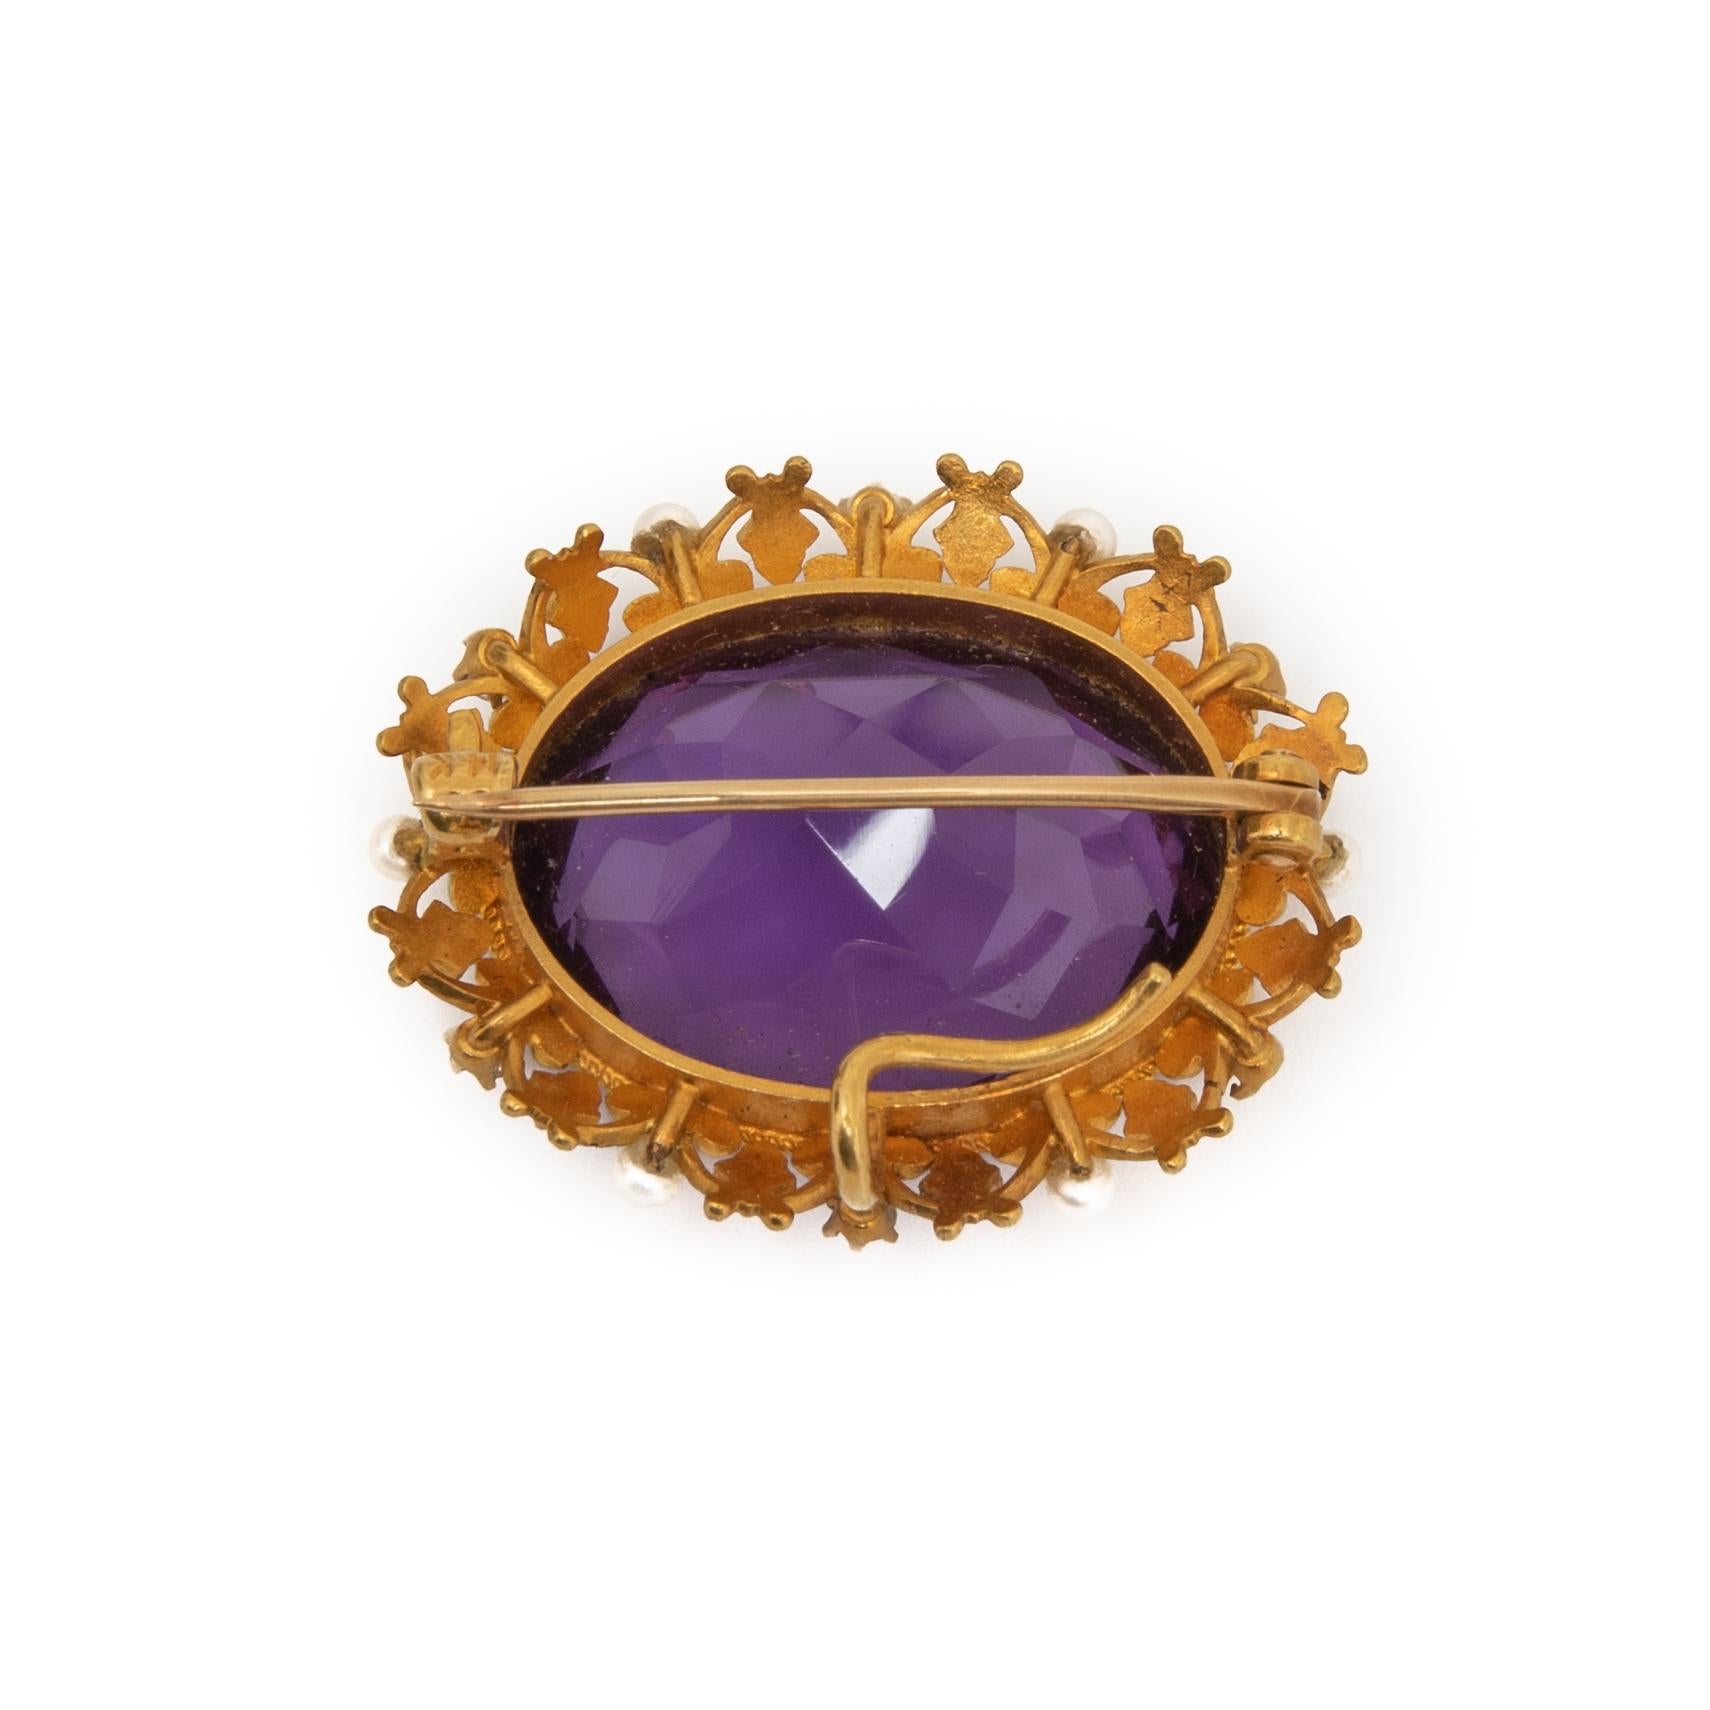 Pendant brooch 14k art nouveau circa 1910 large oval faceted amethyst with diamonds and pearls signed by maker 